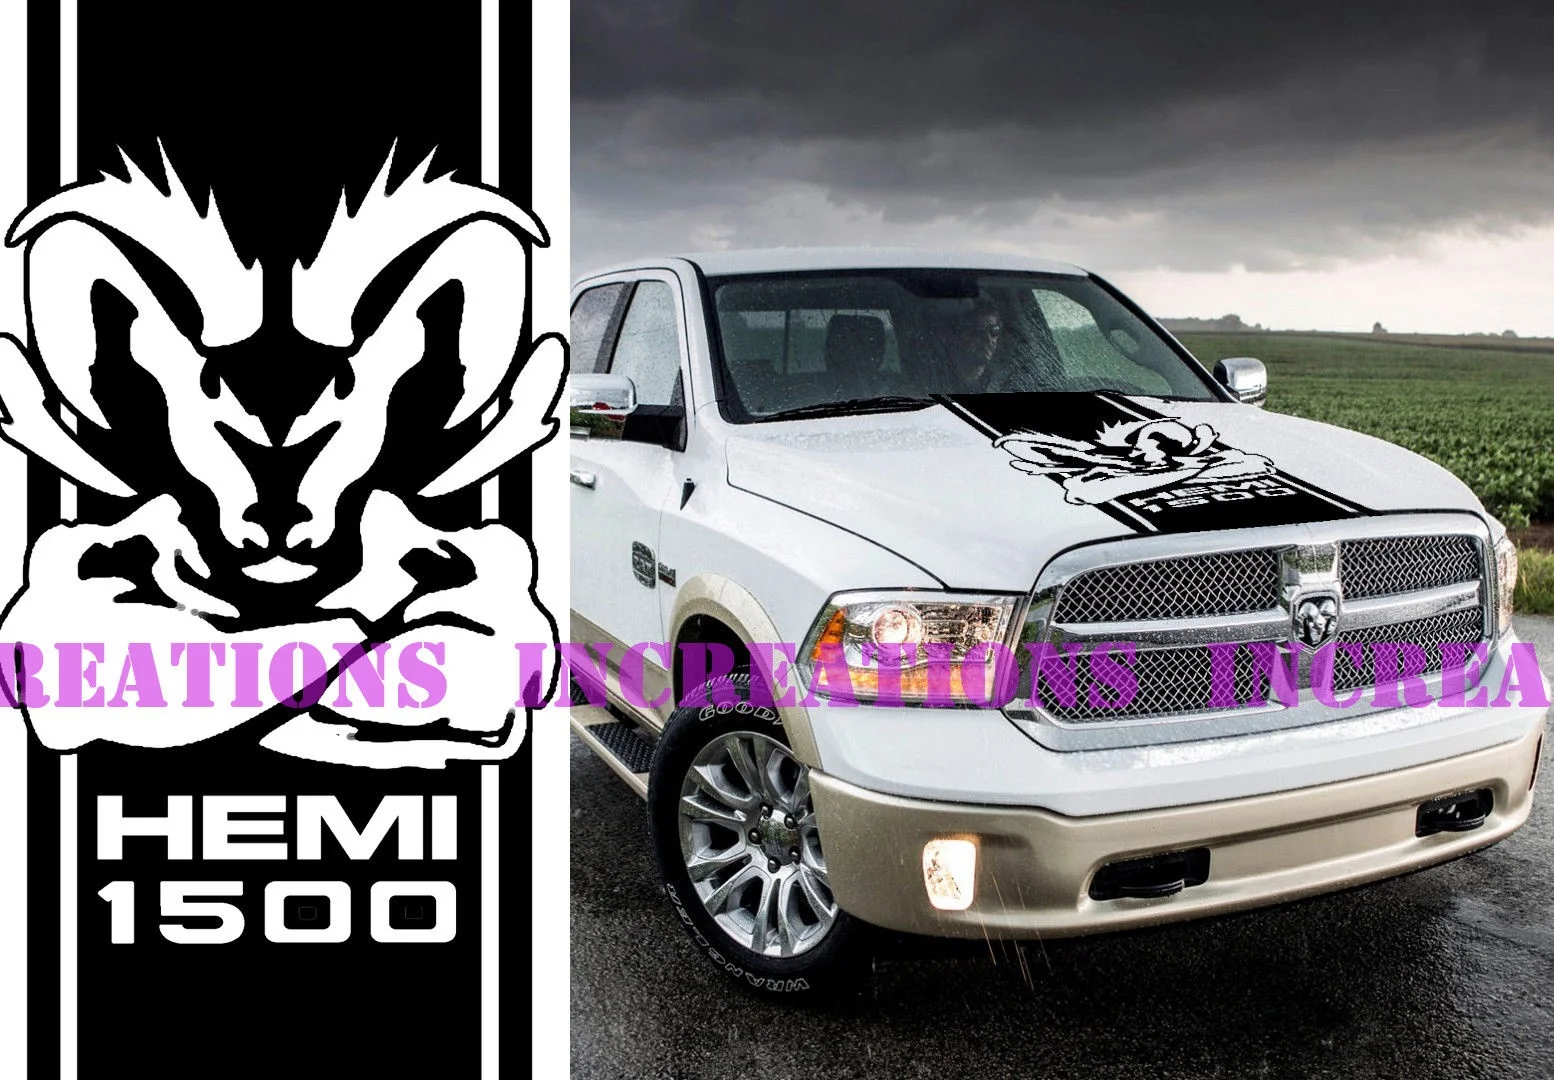 Hood Stripes -Text Available On Decal  Graphic Sticker is Universal Fit Dodge Truck Chev GMC Ram Jeep Car Ford |Toyota